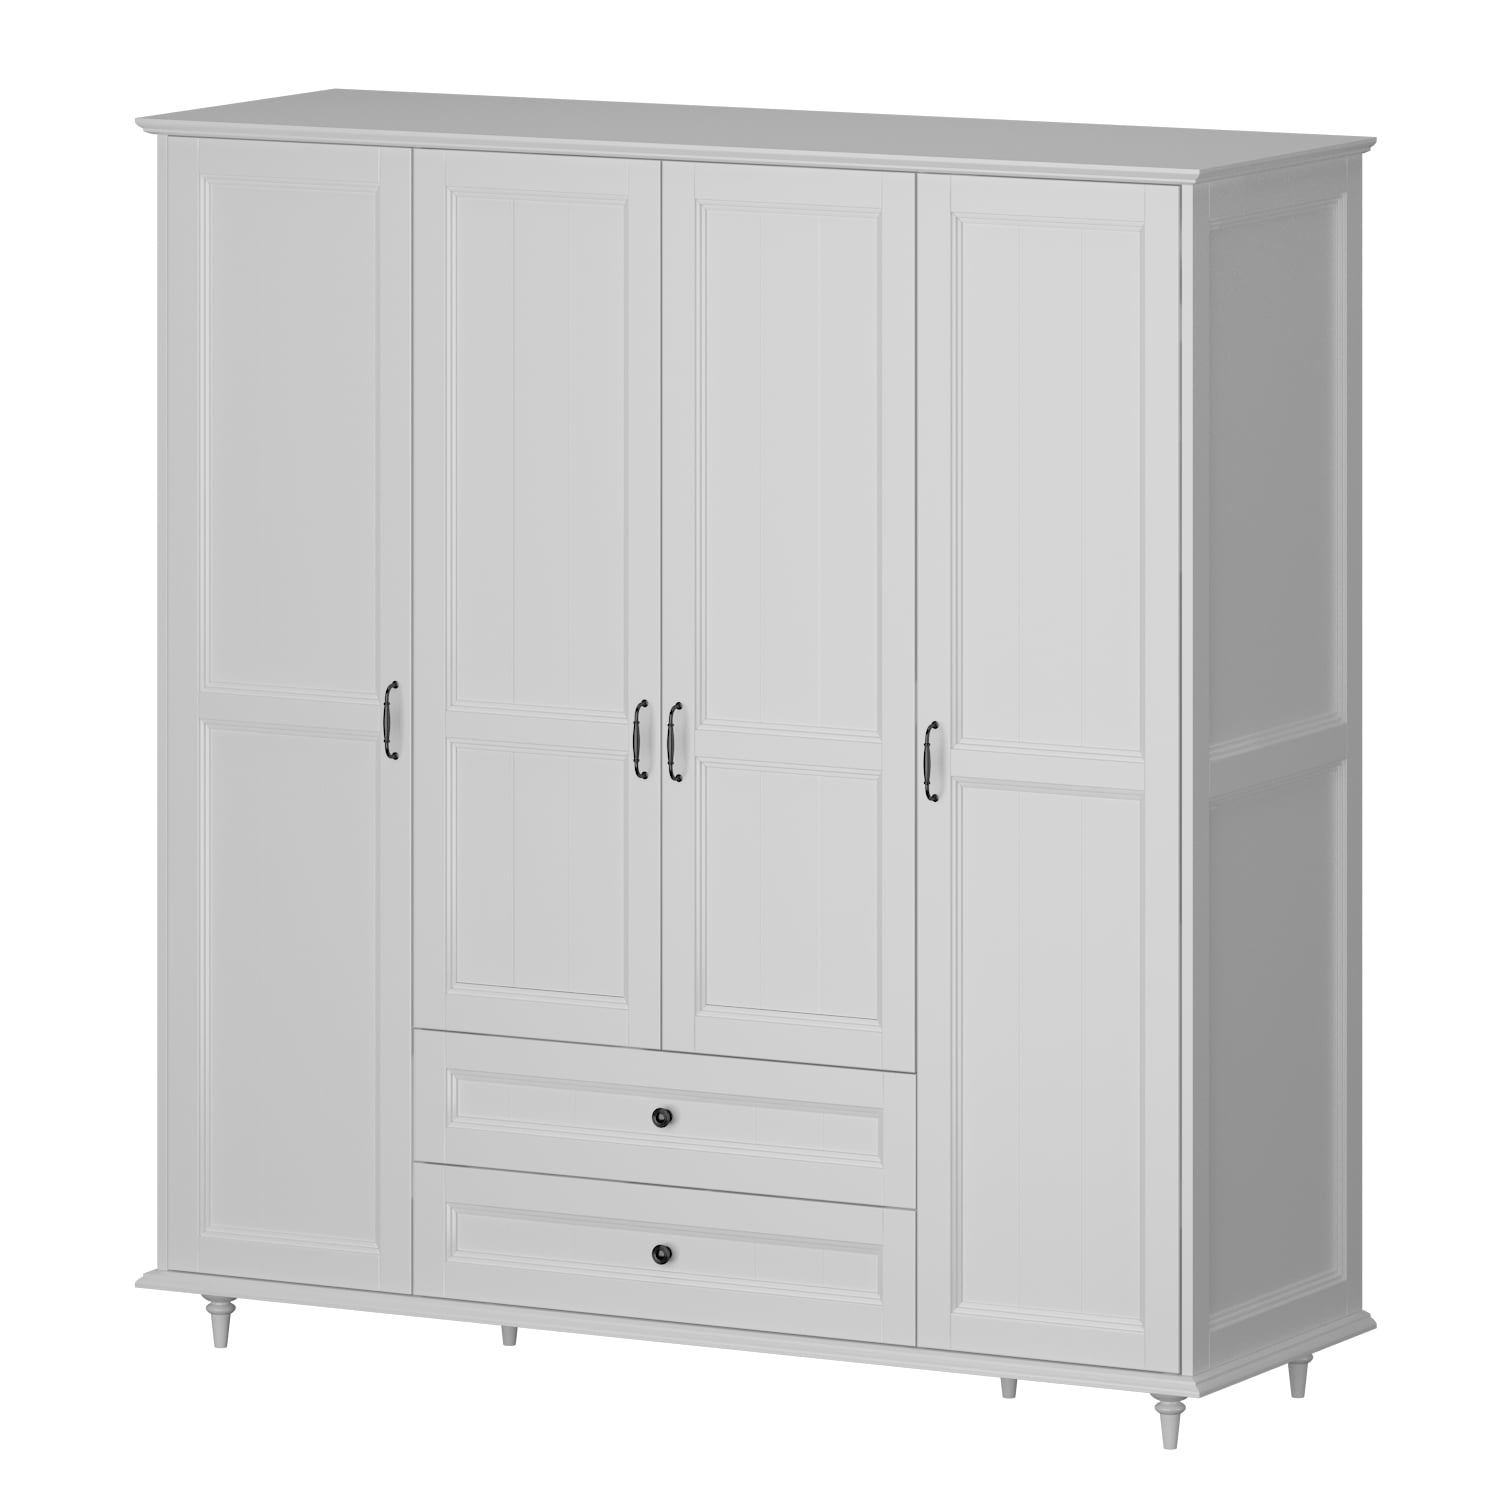 FUFU&GAGA White 8-Door Big Wardrobe Armoires with Hanging Rod, 4-Drawers,  Storage Shelves 93.9 in. H x 63 in. W x 20.6 in. D KF250023-01234 - The  Home